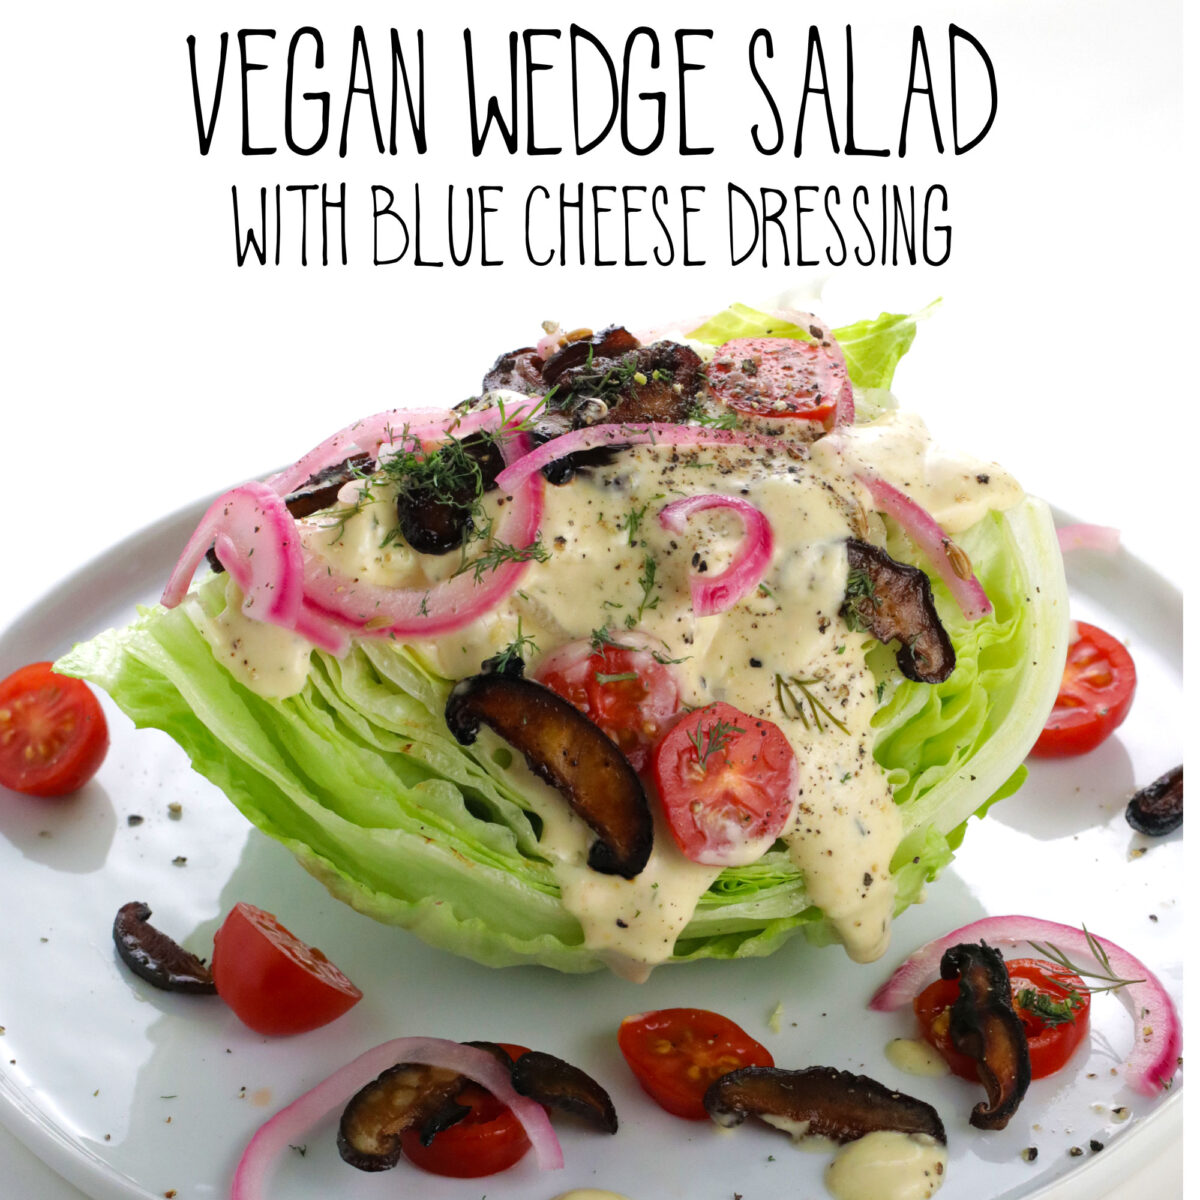 Vegan Wedge Salad with Blue Cheese Dressing